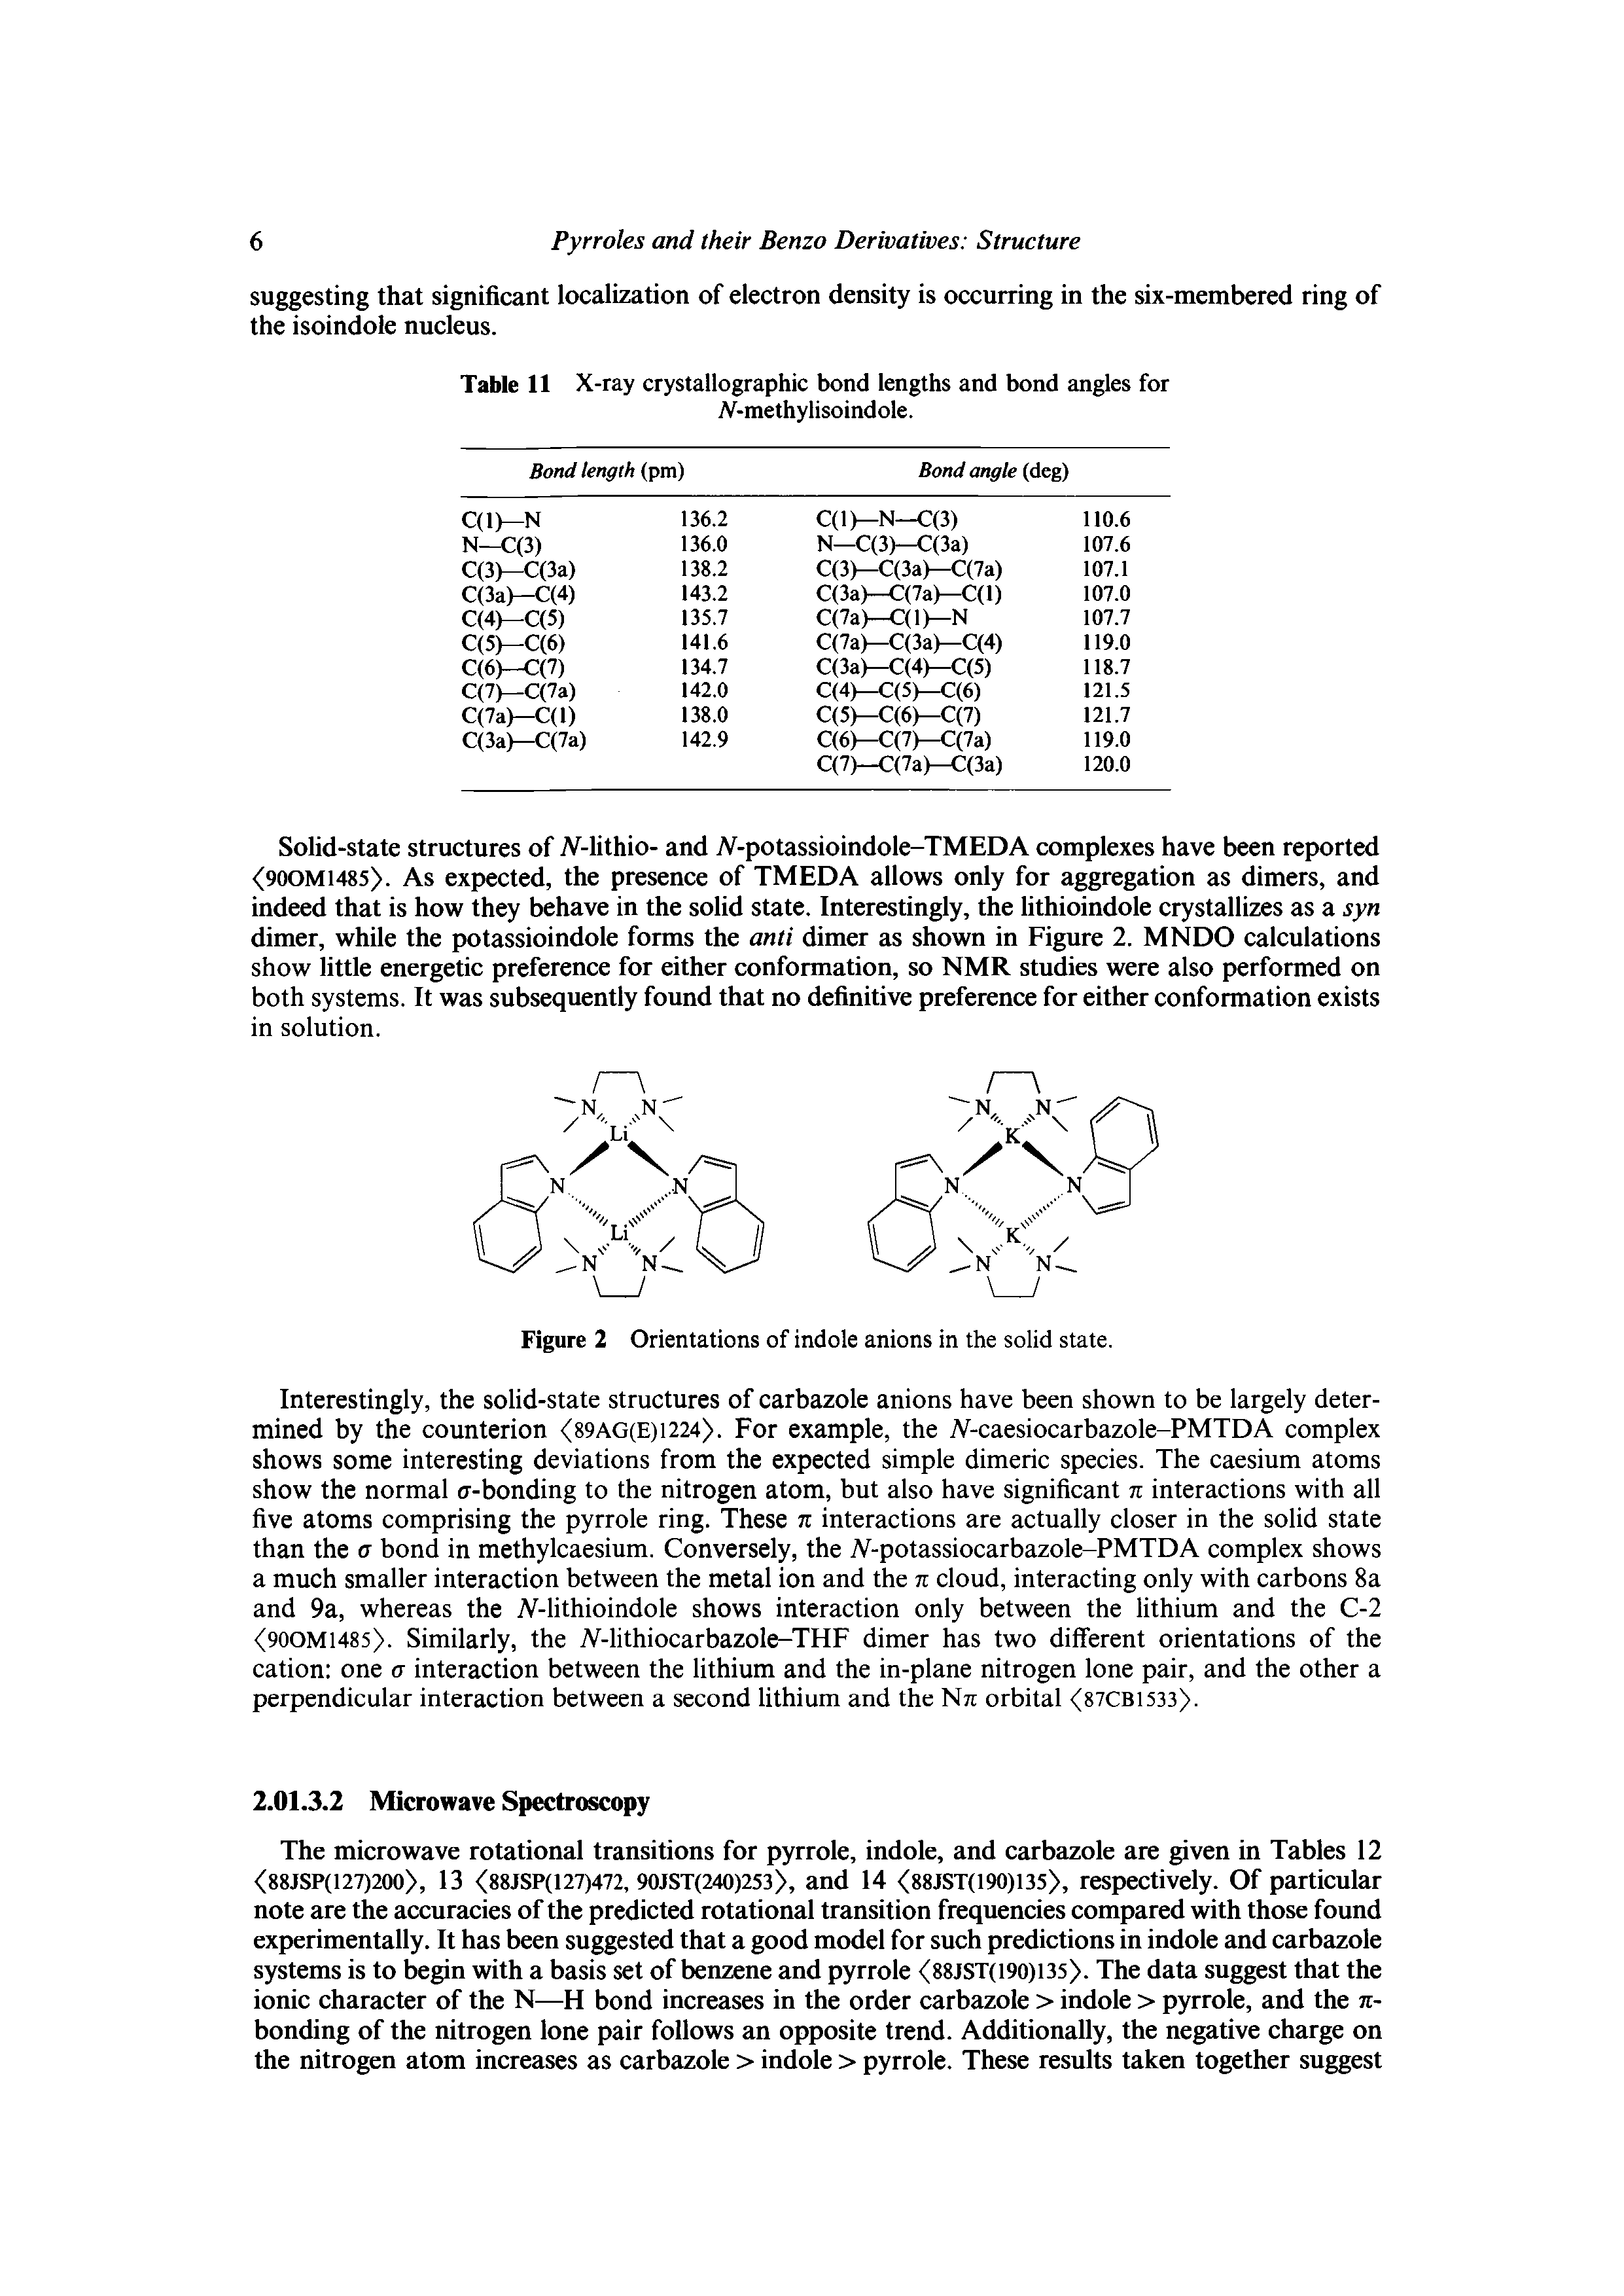 Figure 2 Orientations of indole anions in the solid state.